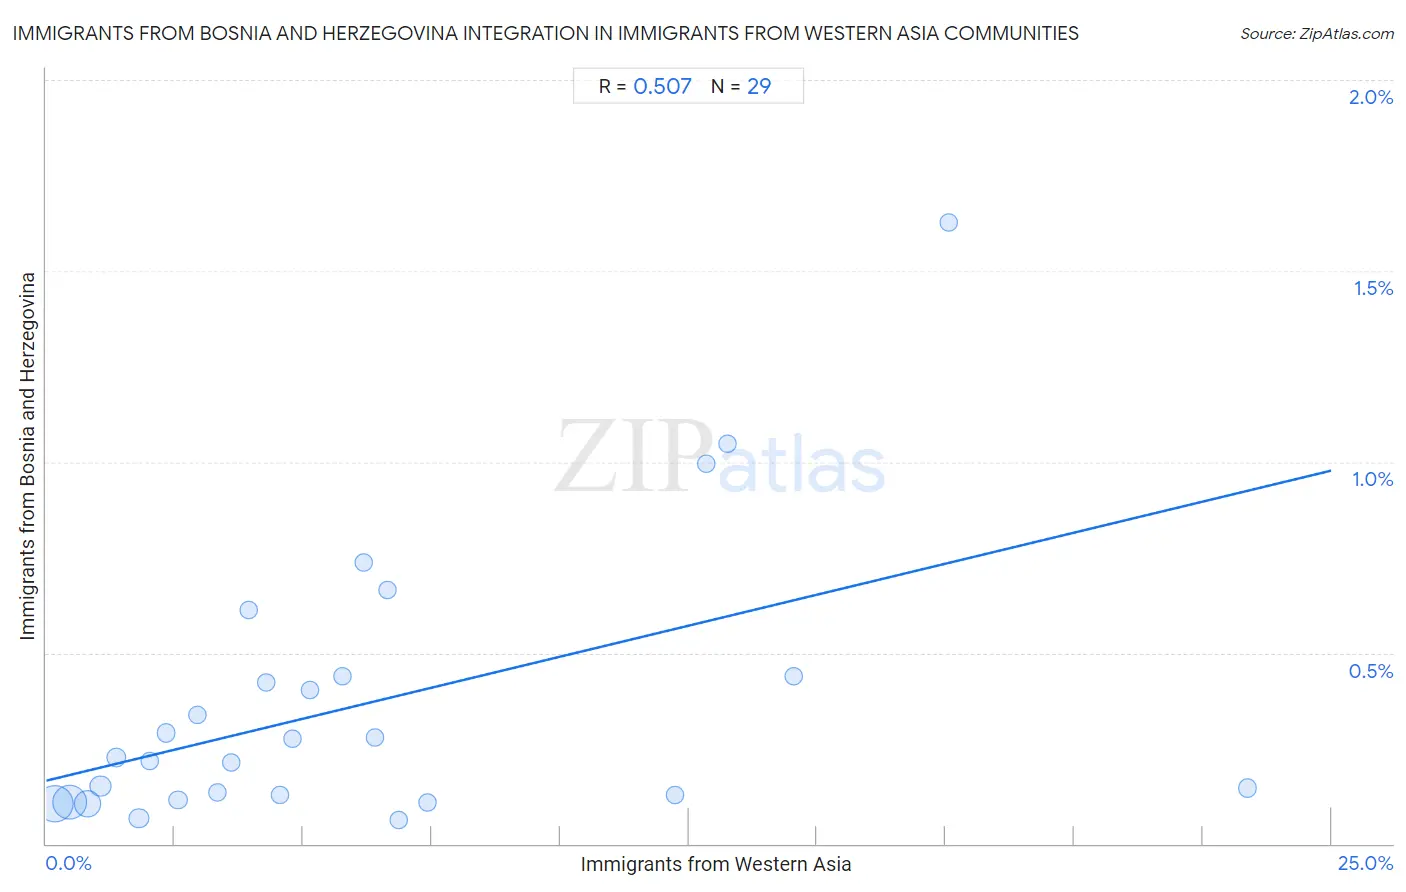 Immigrants from Western Asia Integration in Immigrants from Bosnia and Herzegovina Communities